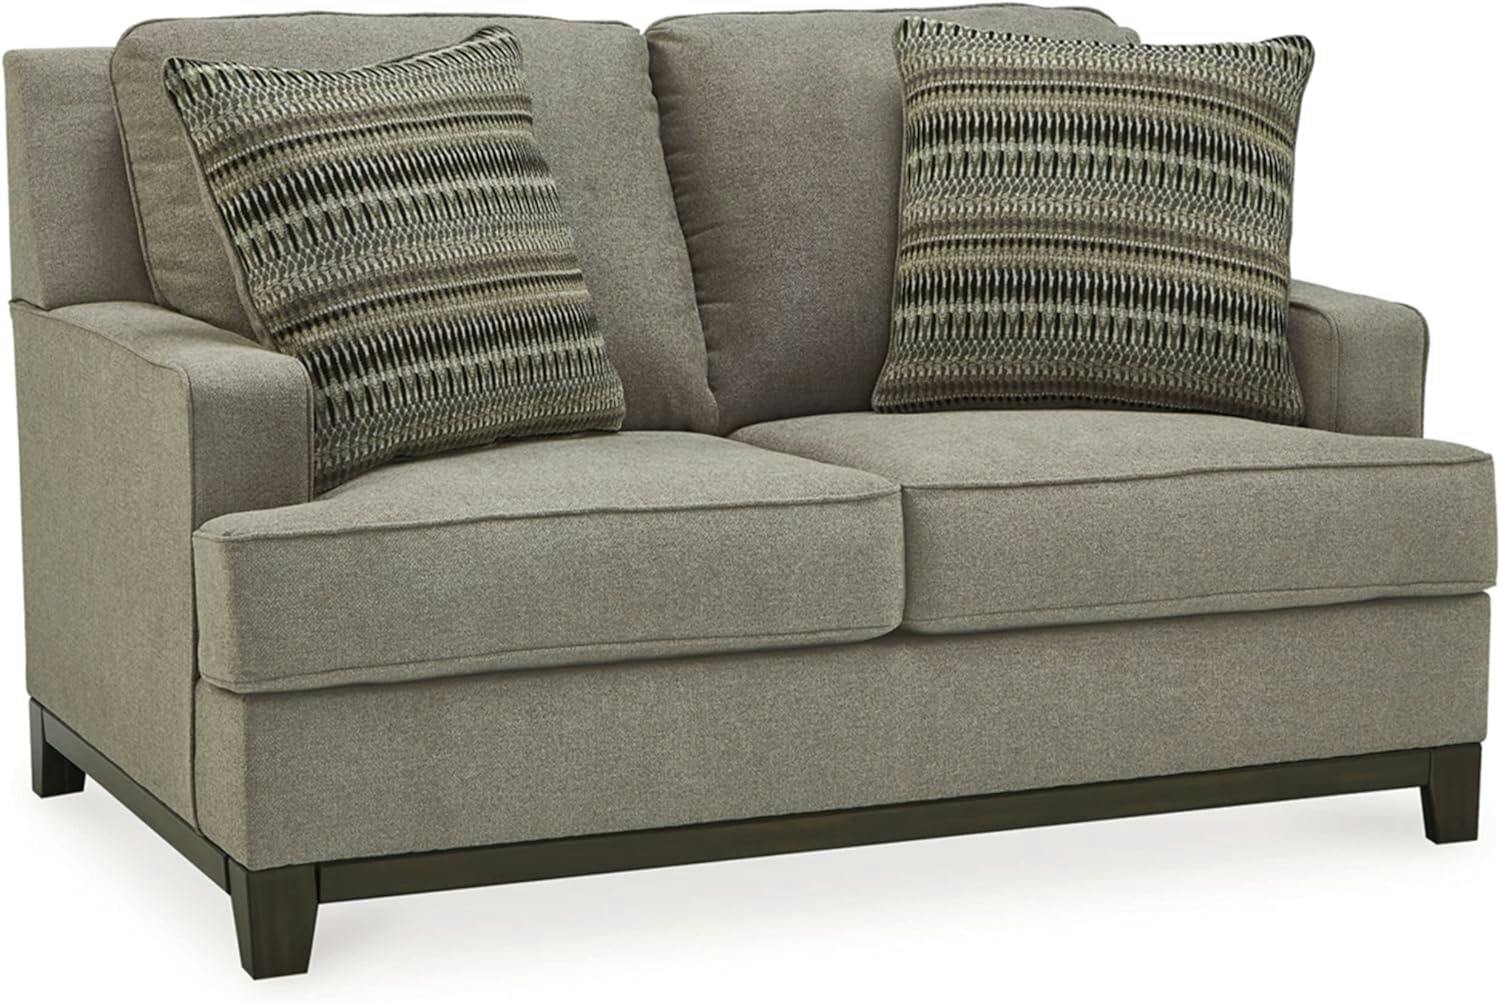 Contemporary Granite Gray Fabric Loveseat with Removable Cushions